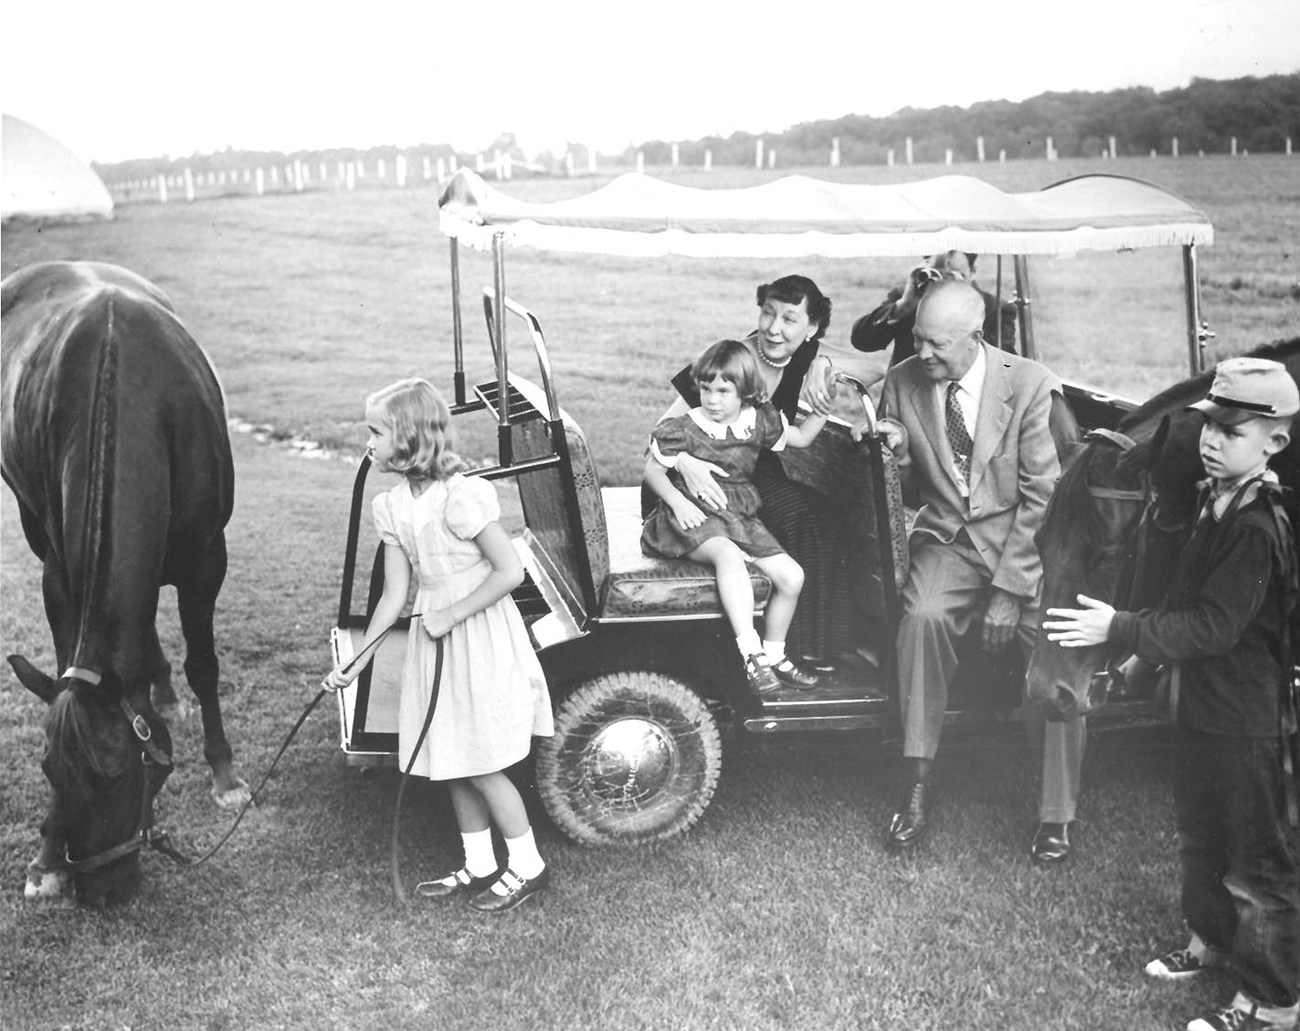 Black and white image of the Eisenhowers on a golf cart with their grandchildren